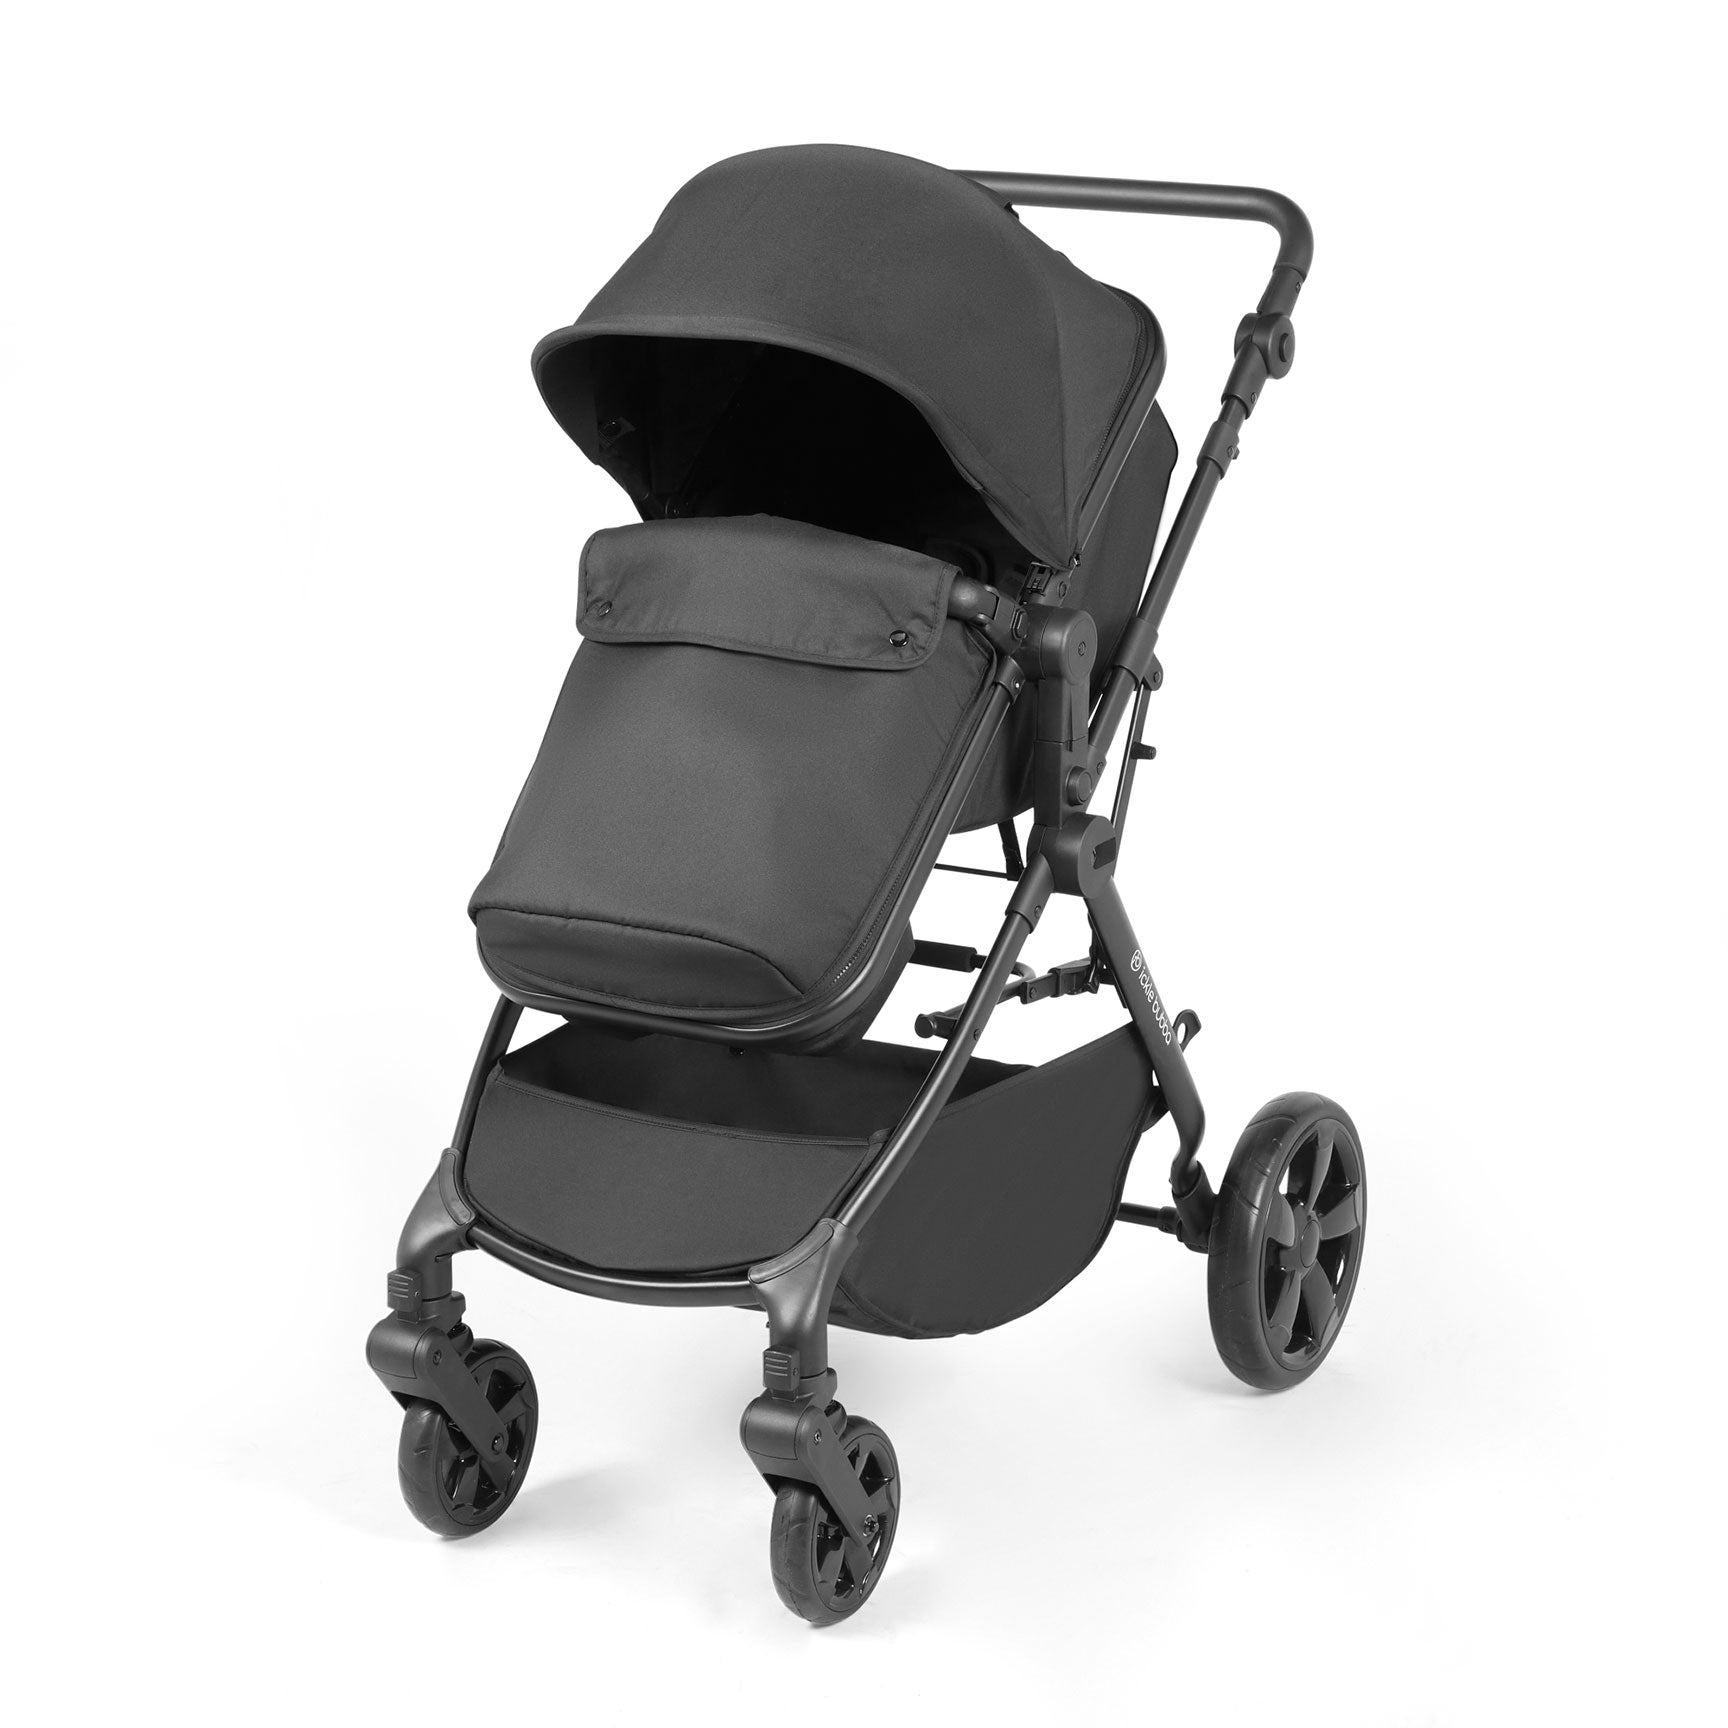 Ickle Bubba baby prams Ickle Bubba Comet 3-in-1 Travel System with Astral Car Seat - Black 10-008-101-002